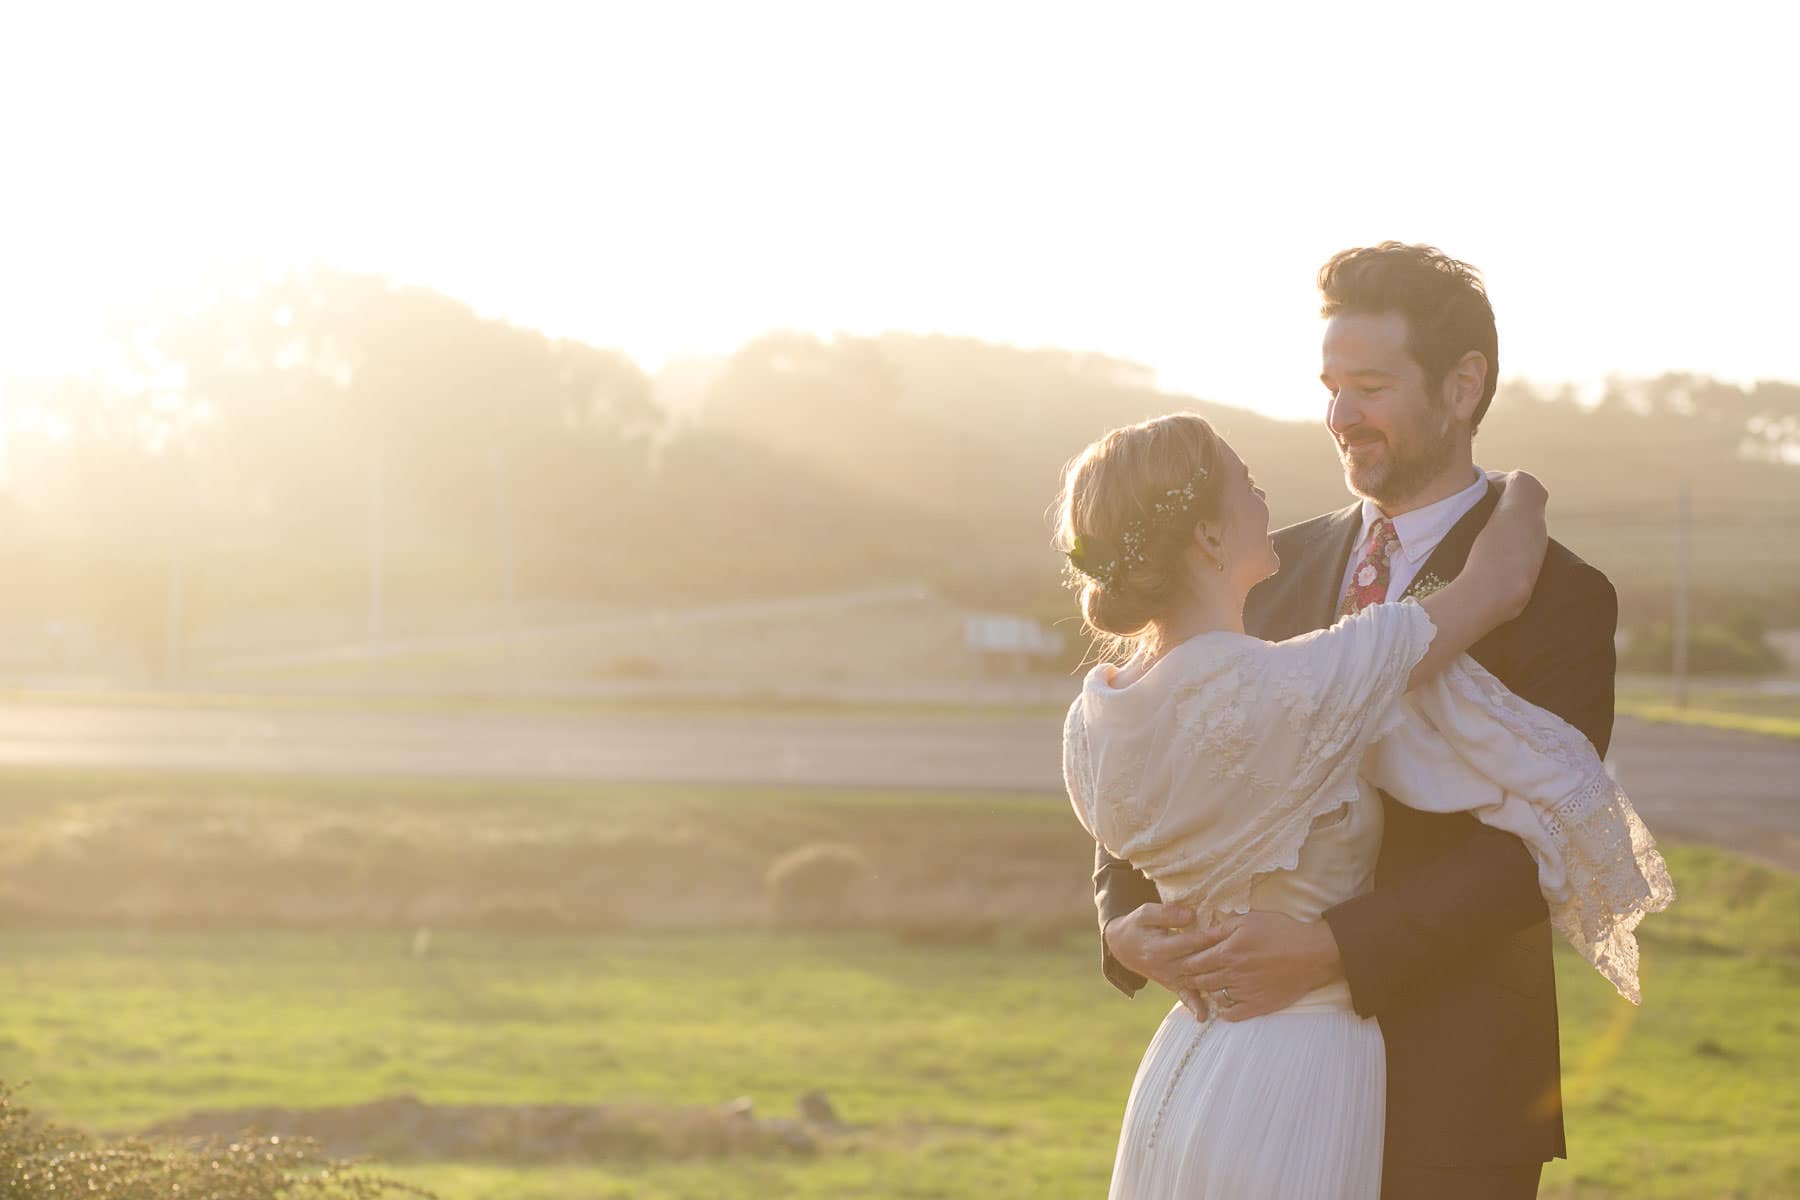 Bride and Groom hugging outside on grassy hill during sunset